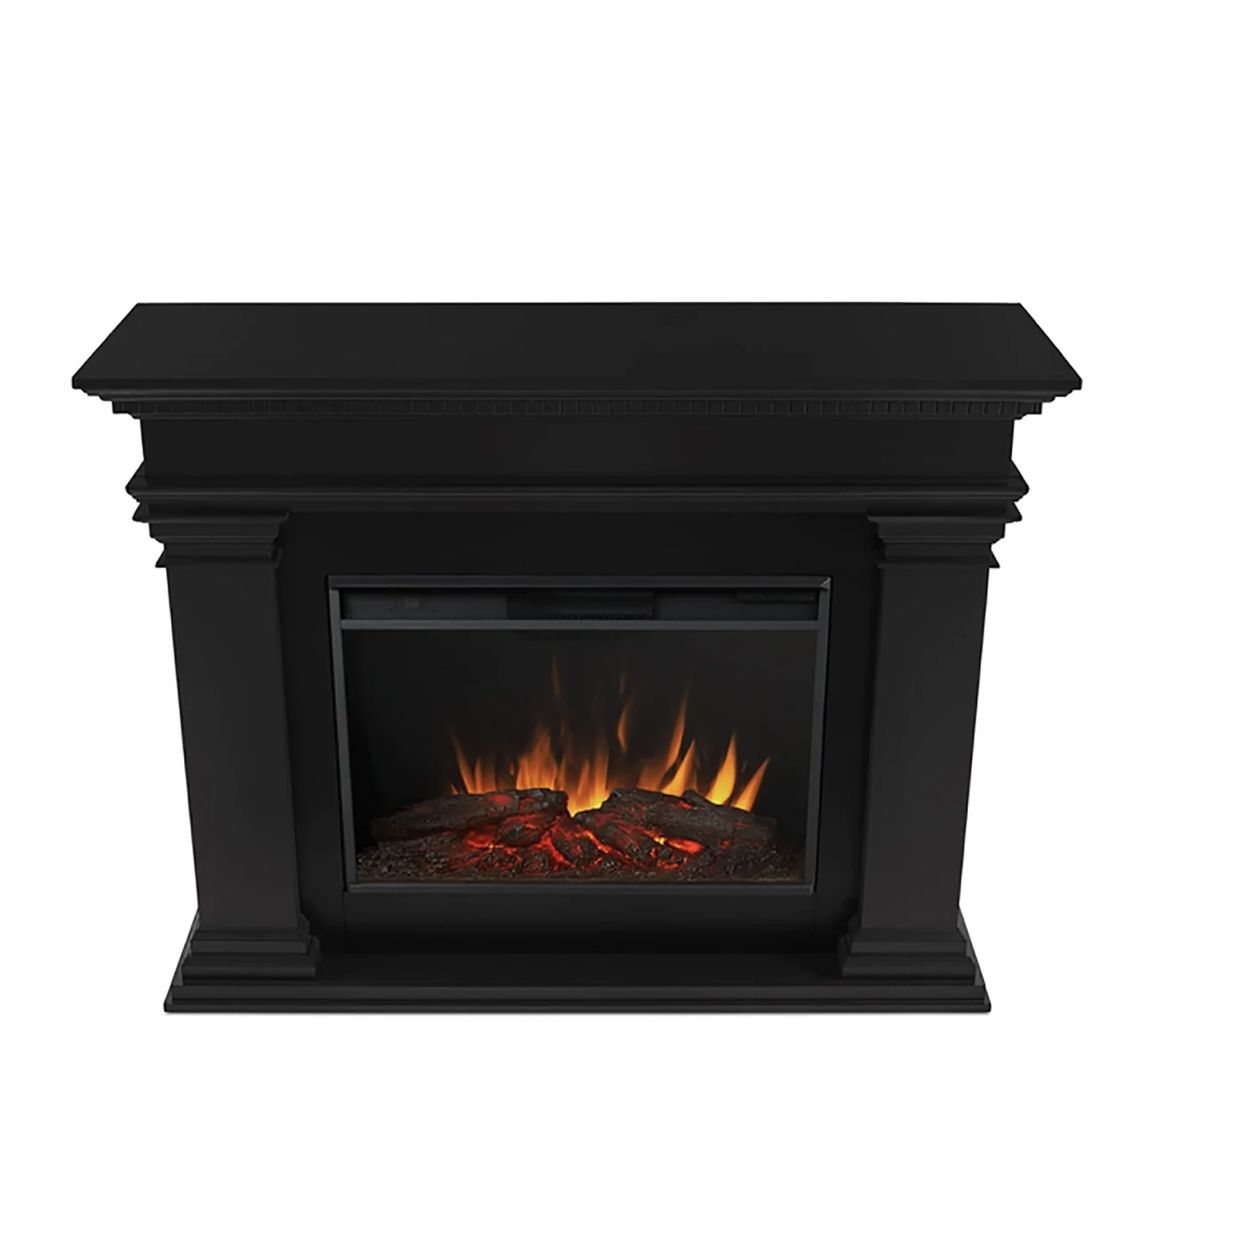 Electric fireplace With Black Mantel 